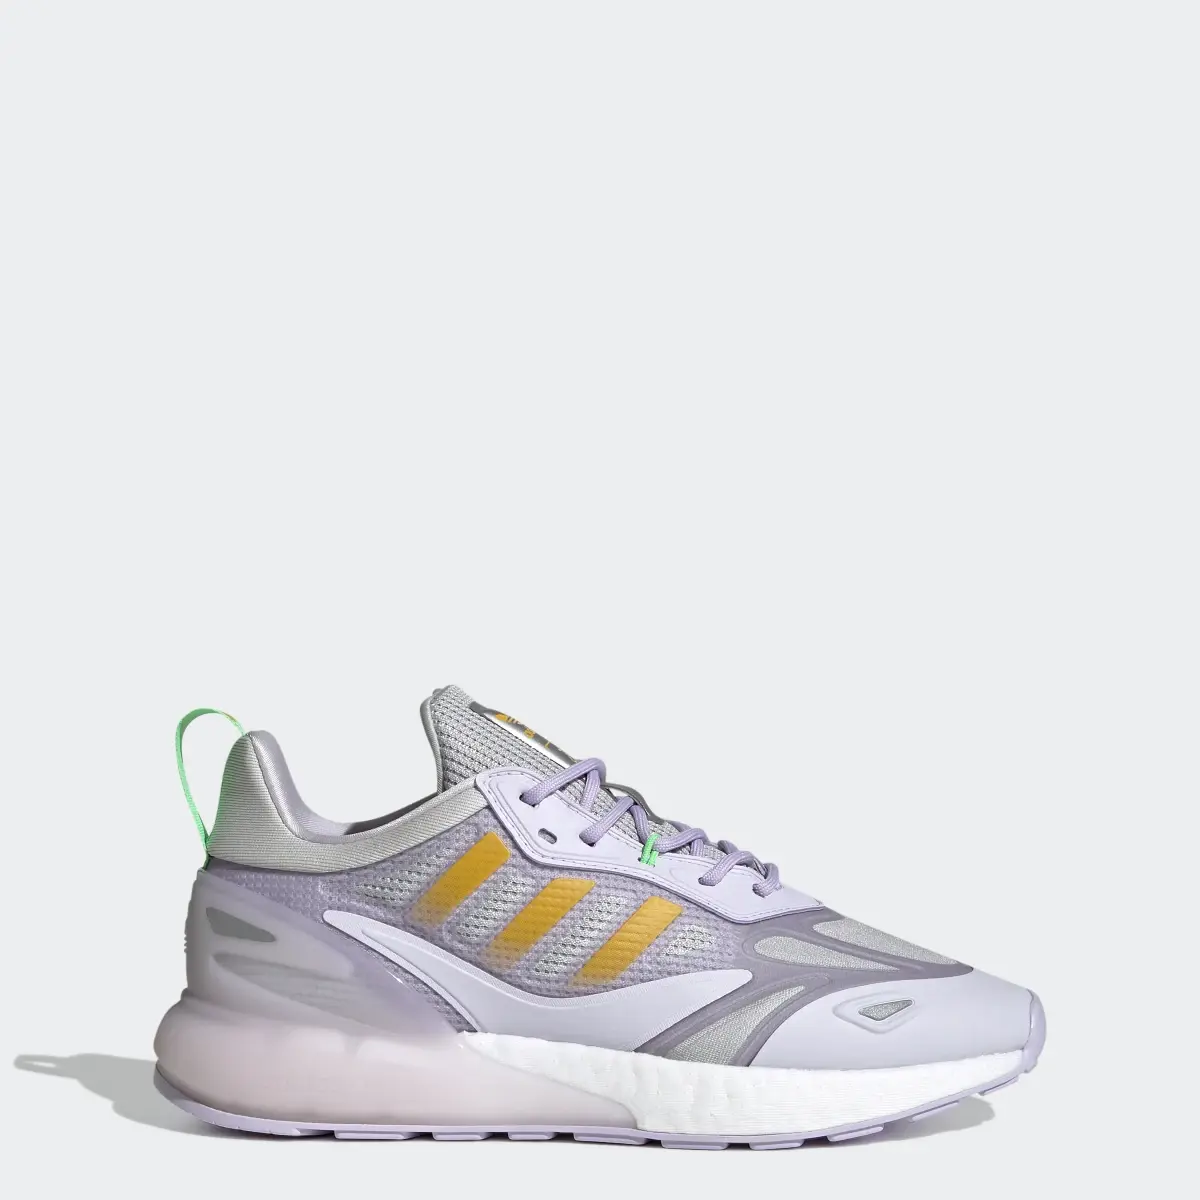 Adidas ZX 2K Boost 2.0 Shoes. 1